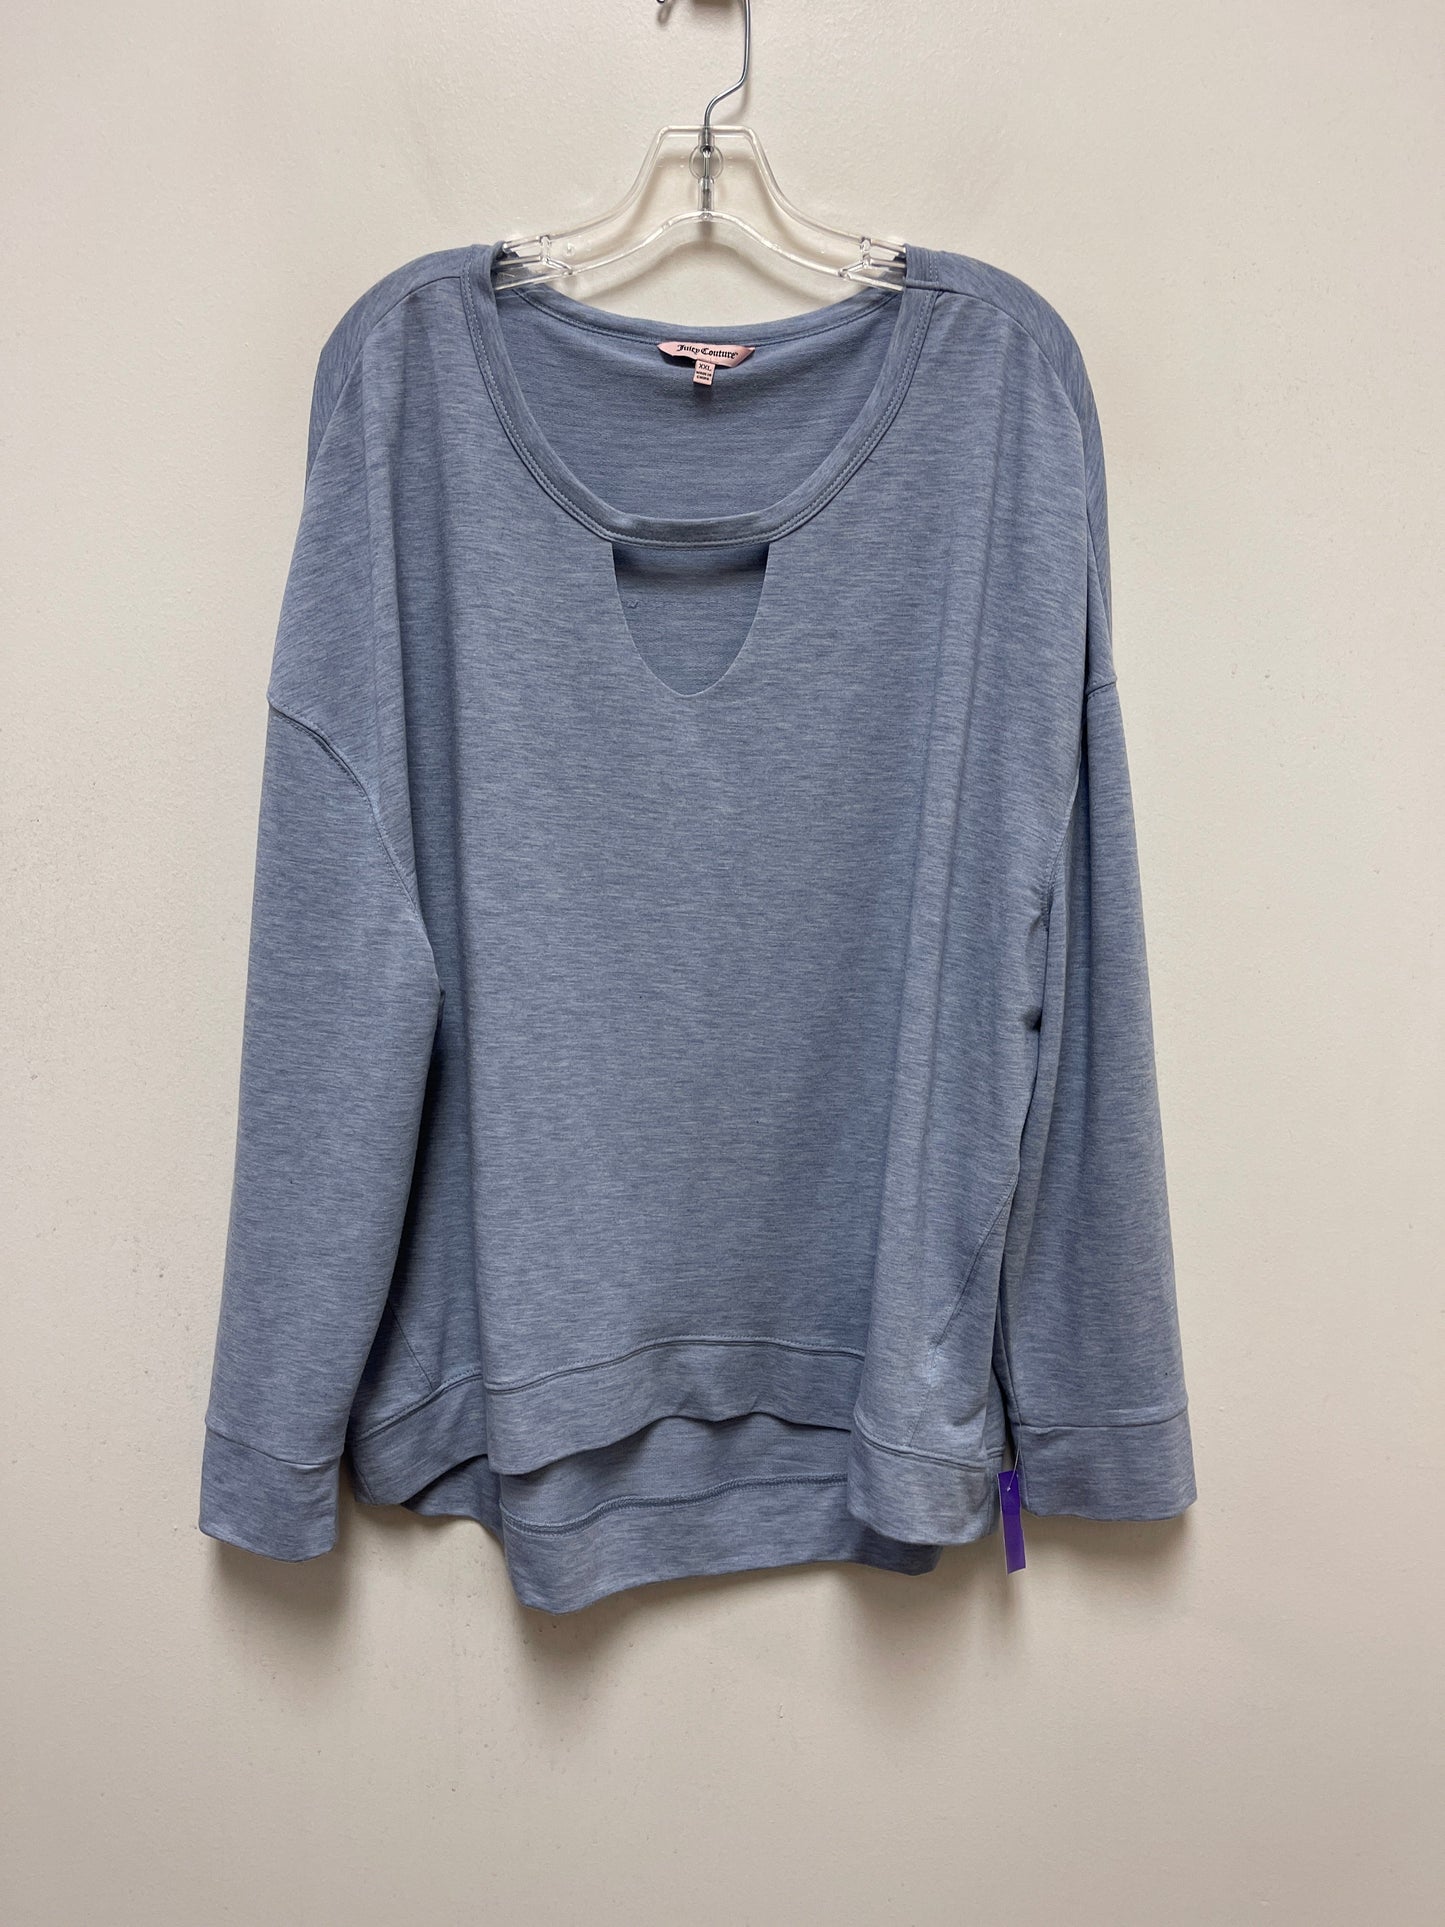 Blue Top Long Sleeve Juicy Couture, Size 2x